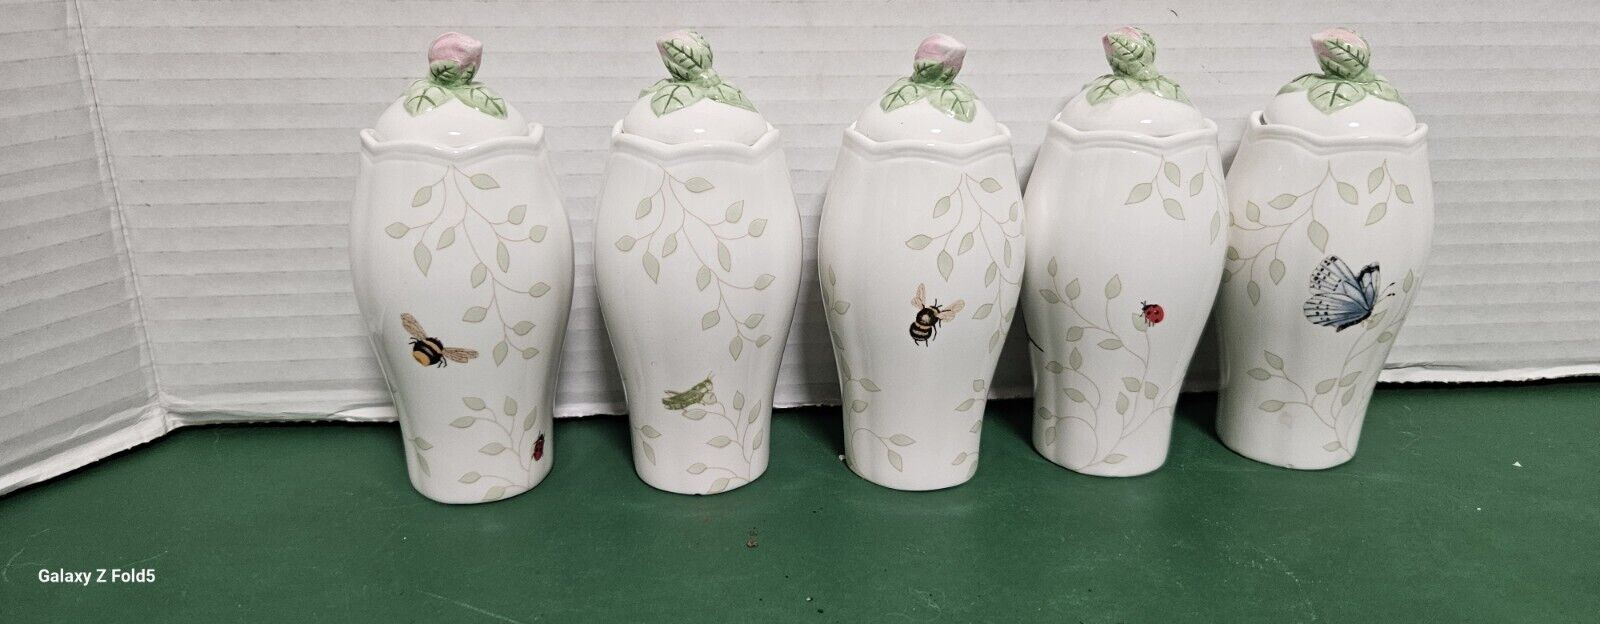 Lenox Lot Of 5 Beautifully Crafted Vintage Porcelain Spice Holders. Pristine...